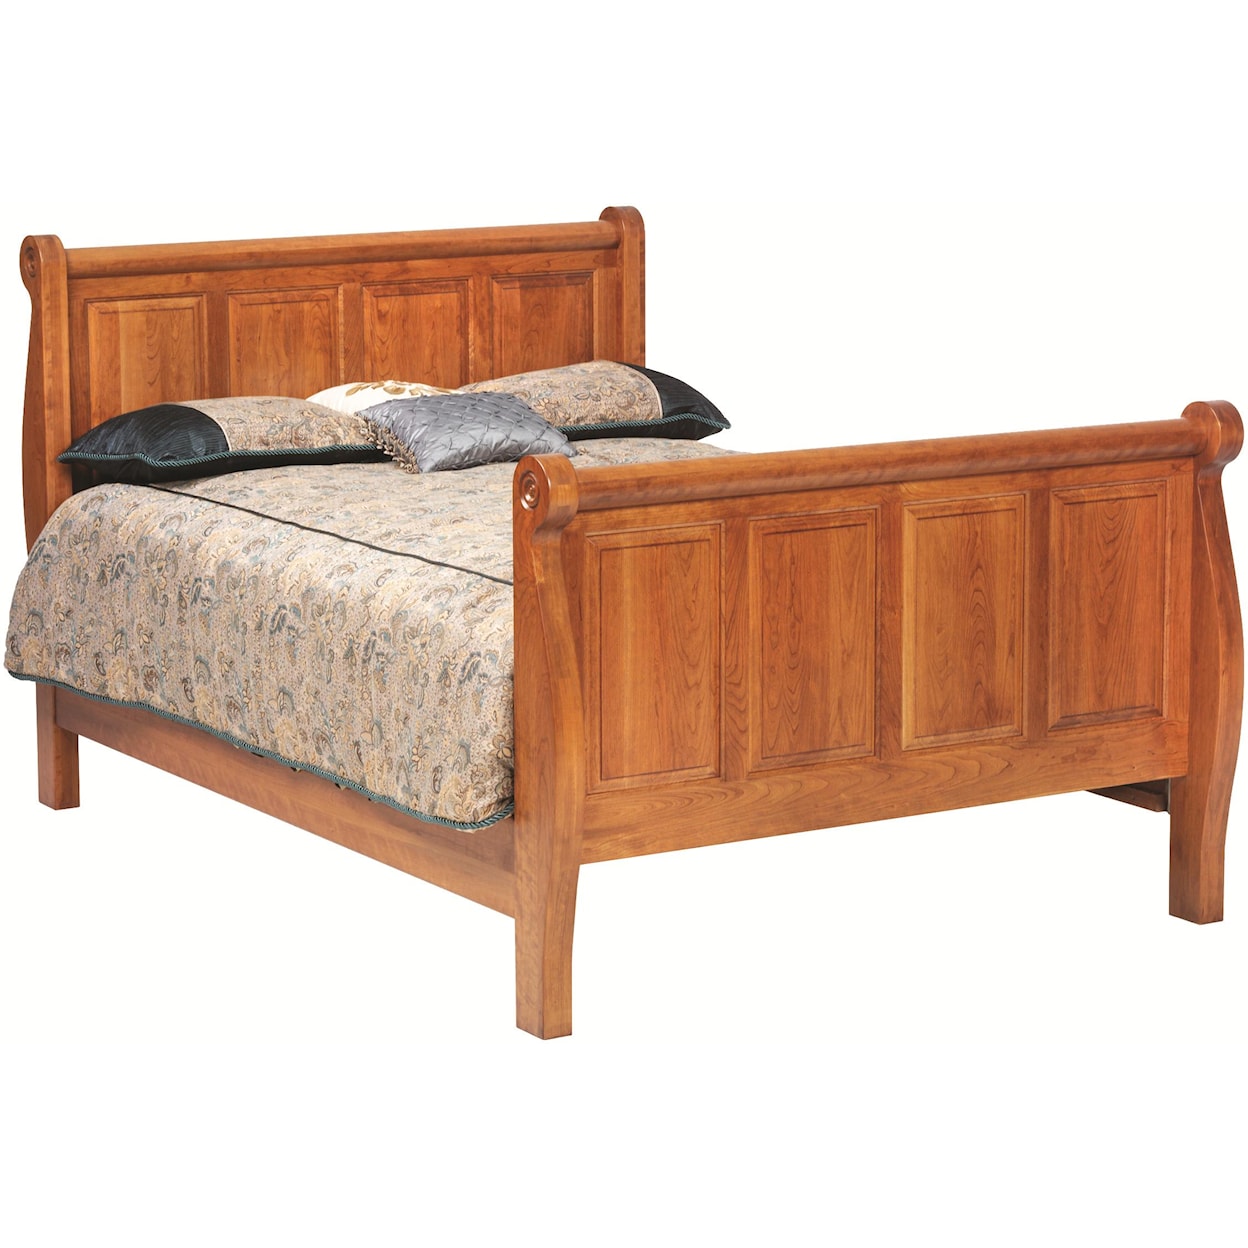 Millcraft Victorias Tradition King Sleigh Bed